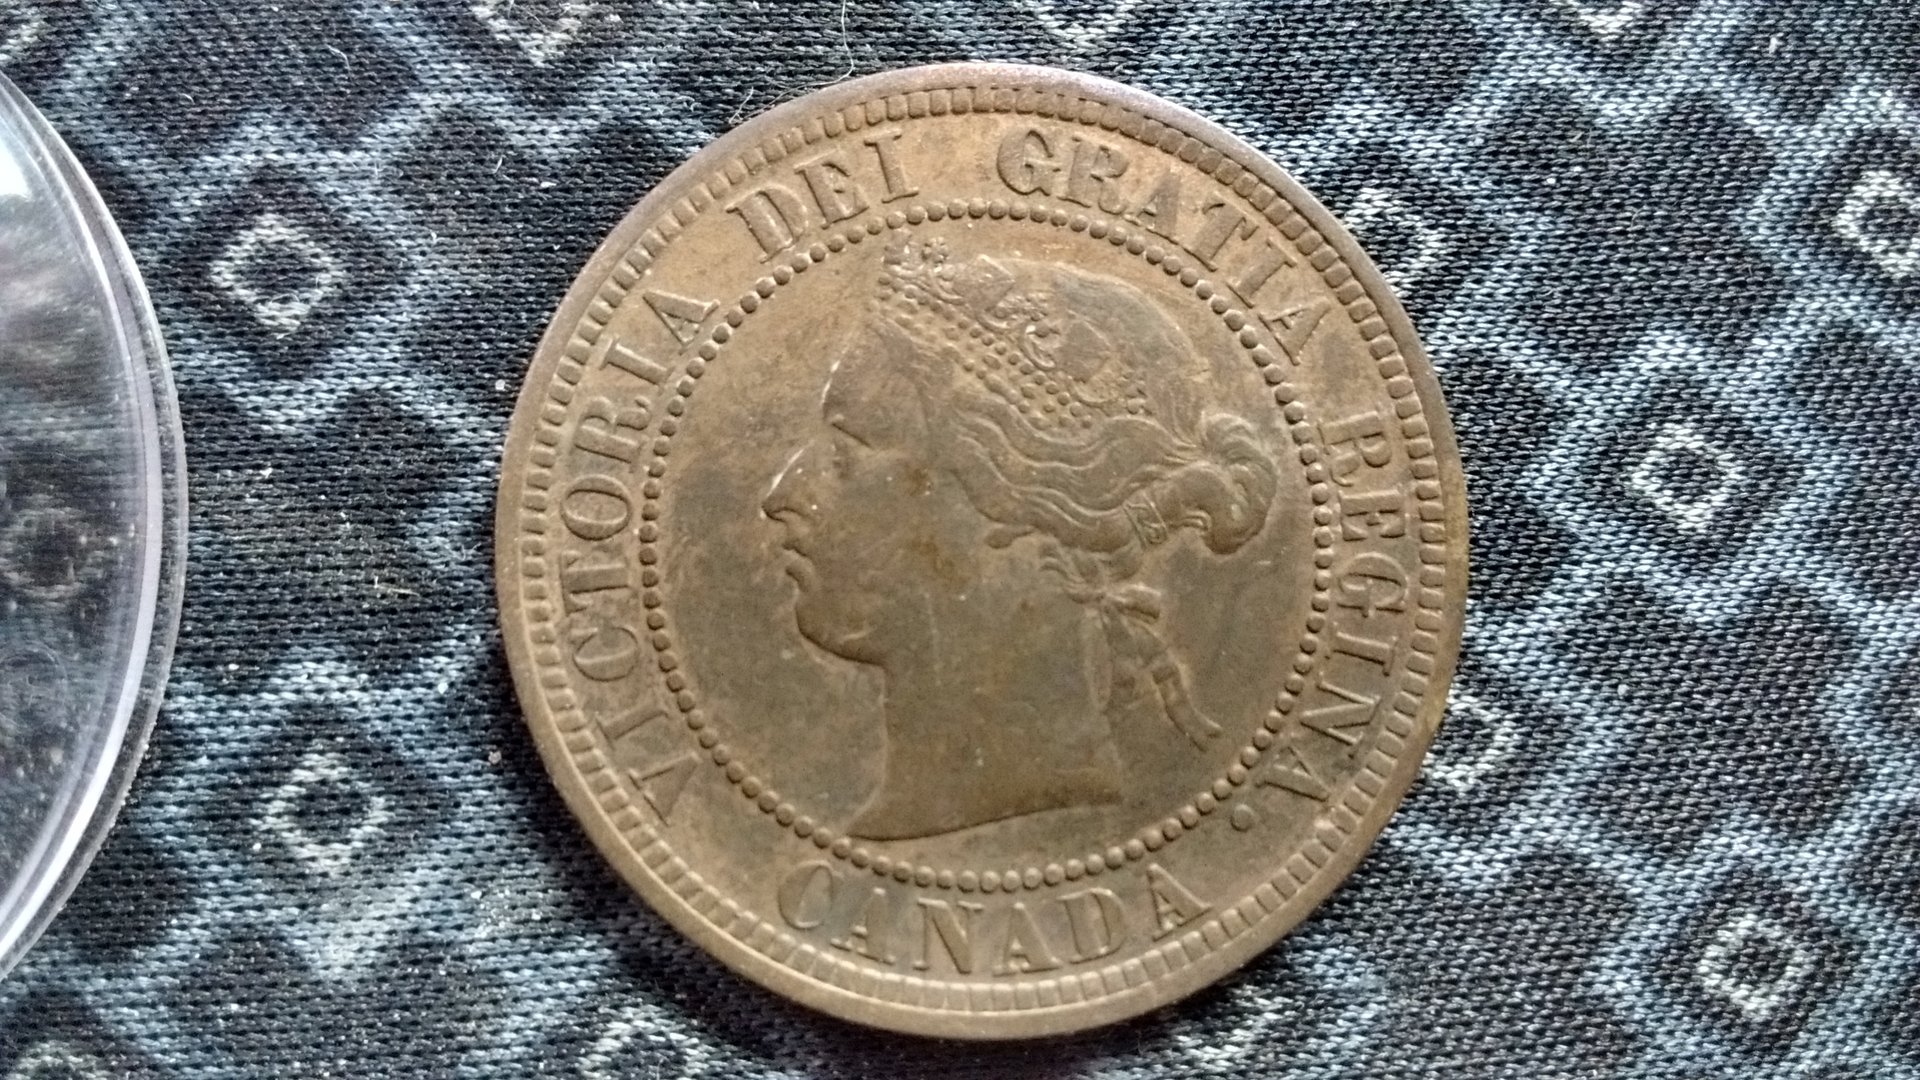 1876 one cent canada obv.jpg